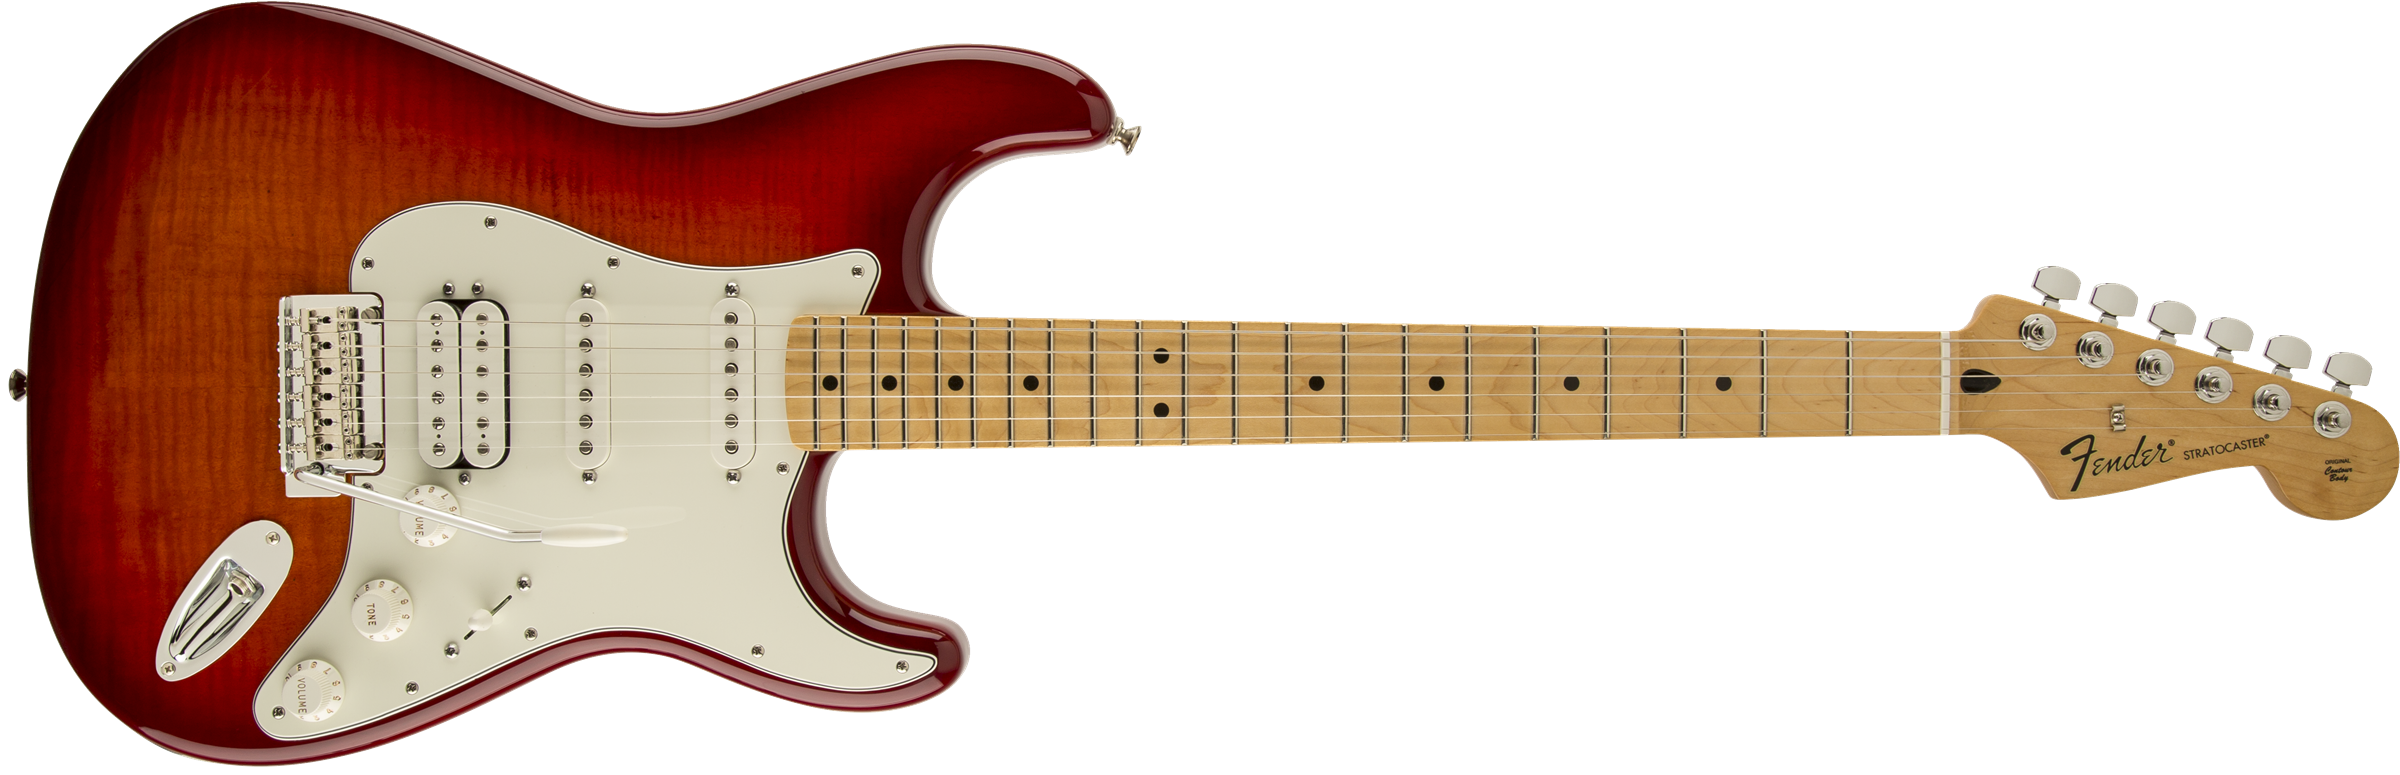 Fender® Deluxe Stratocaster® HSS Plus Top with iOS Connectivity, Maple Fingerboard, Aged Cherry Burst